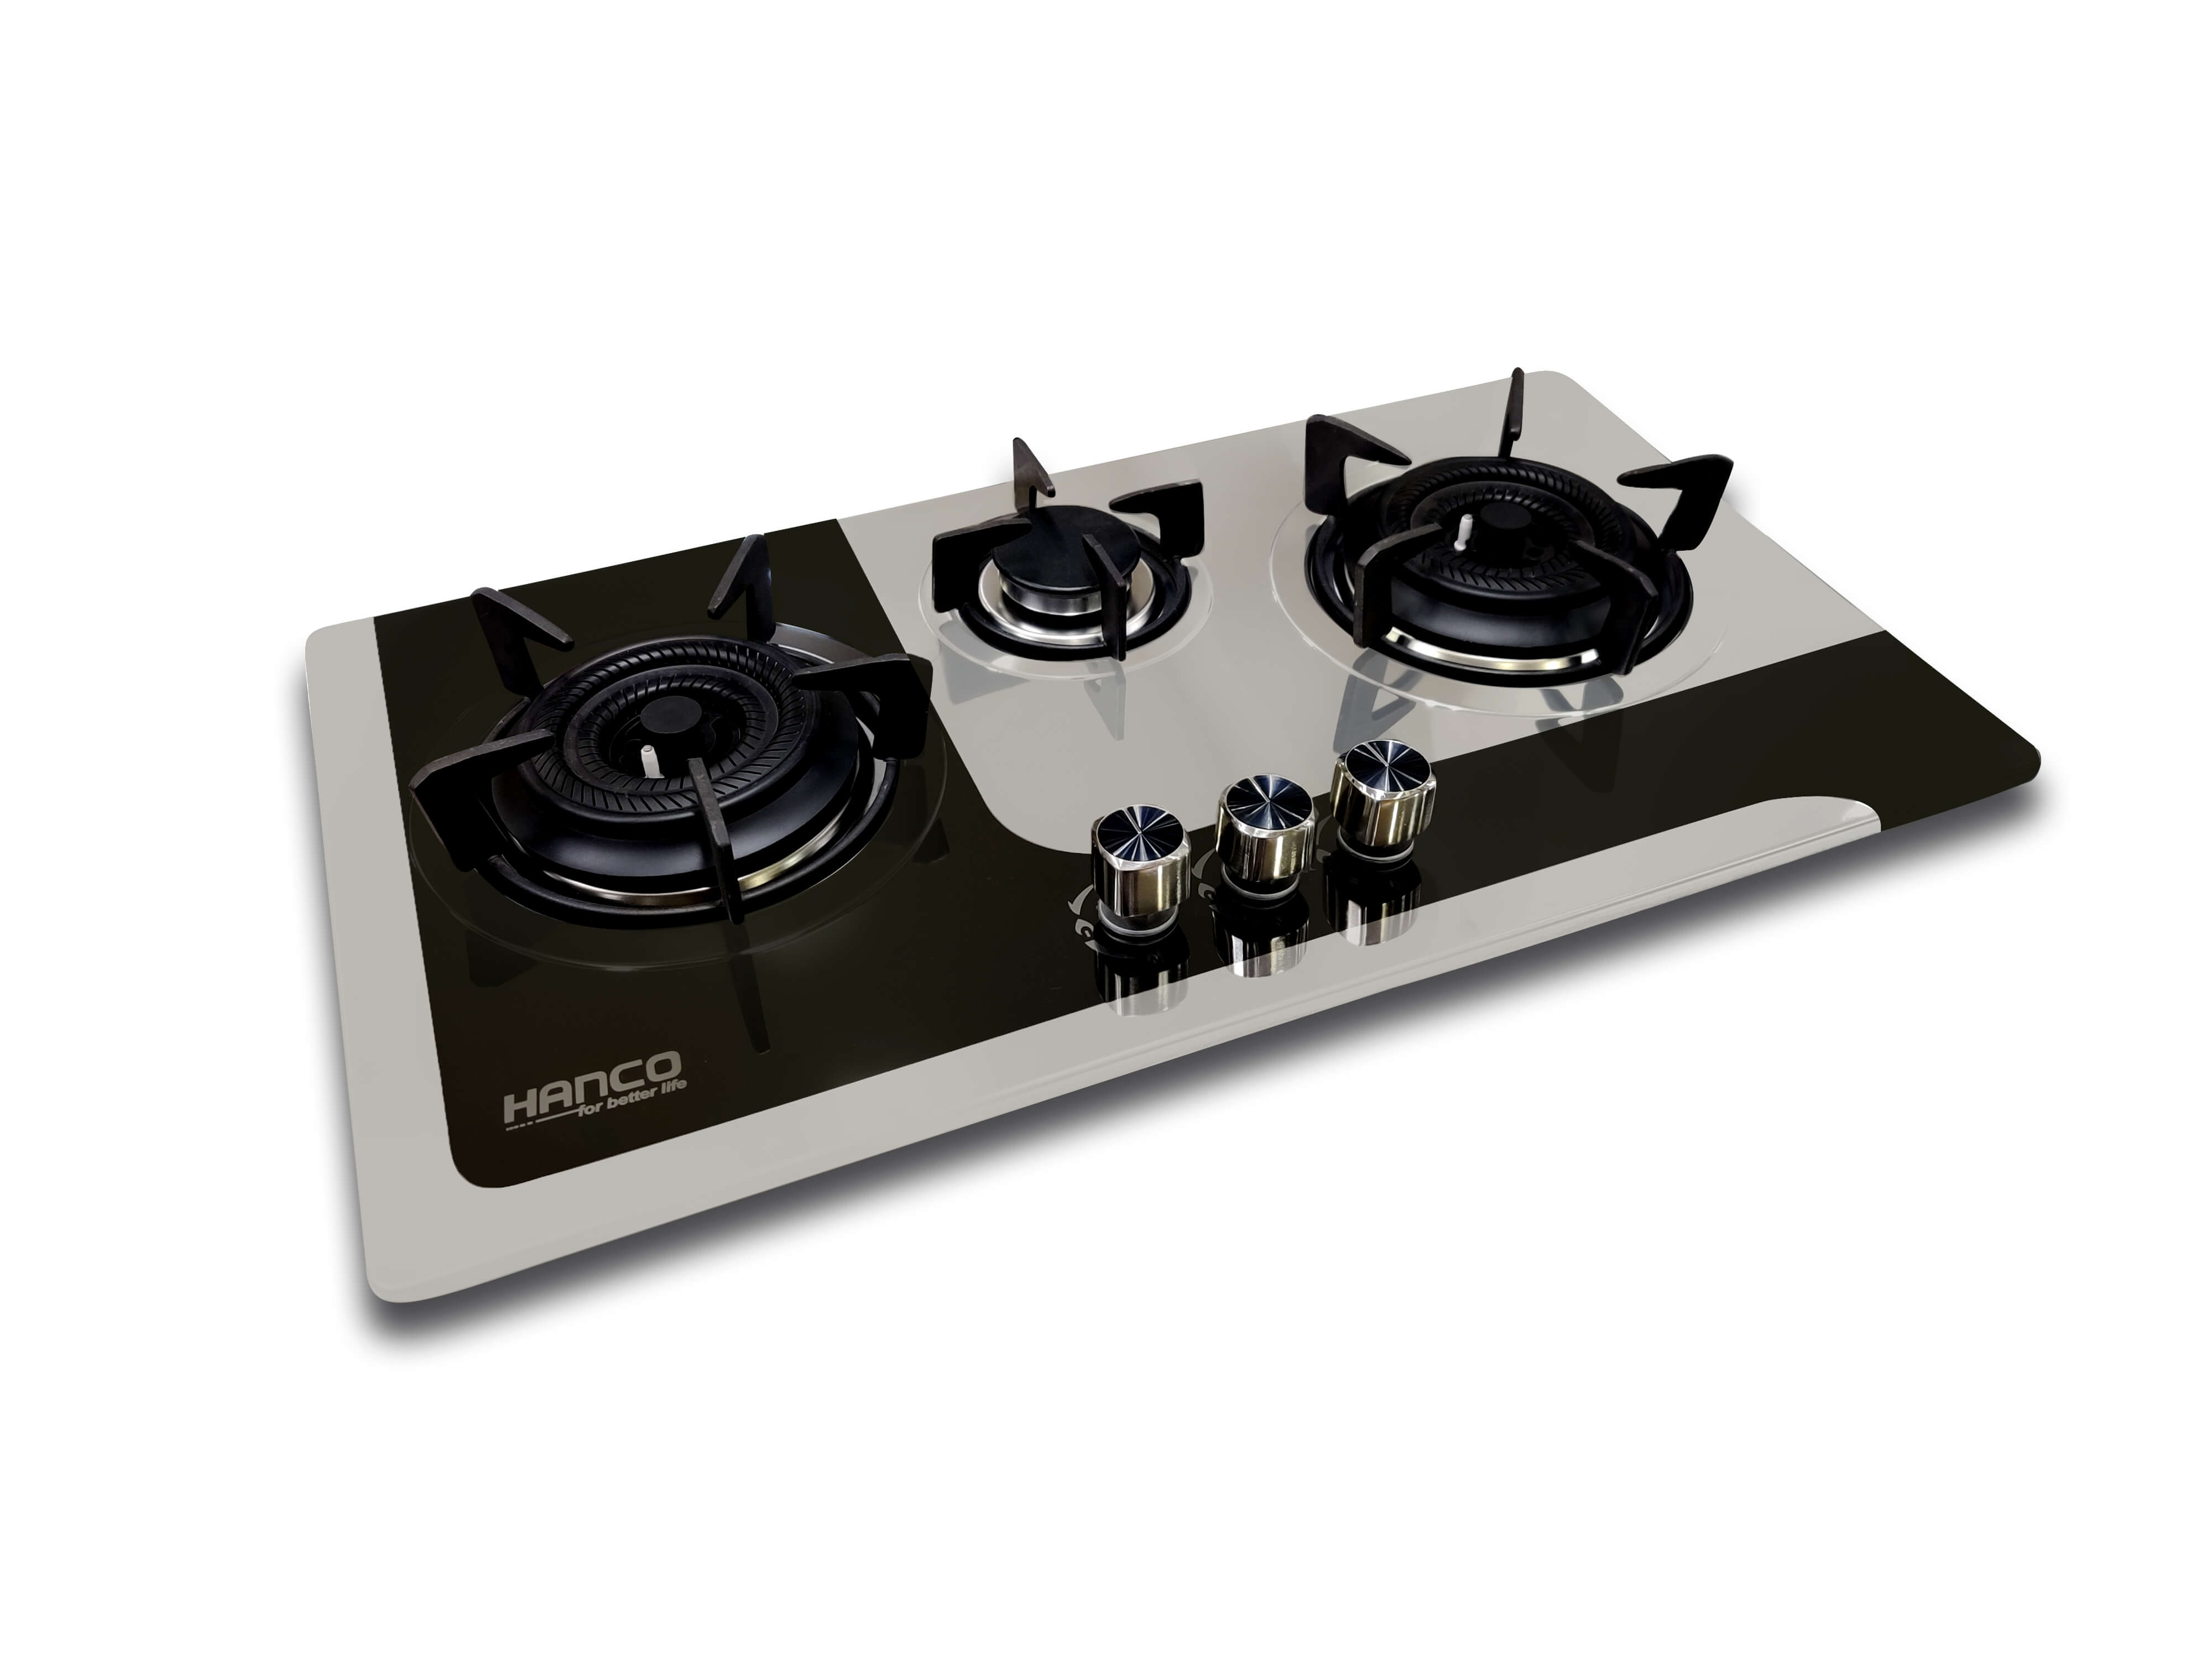 Hanco Stainless Steel Hob With Brass Burners (model 214) - Auto Ignition Stove